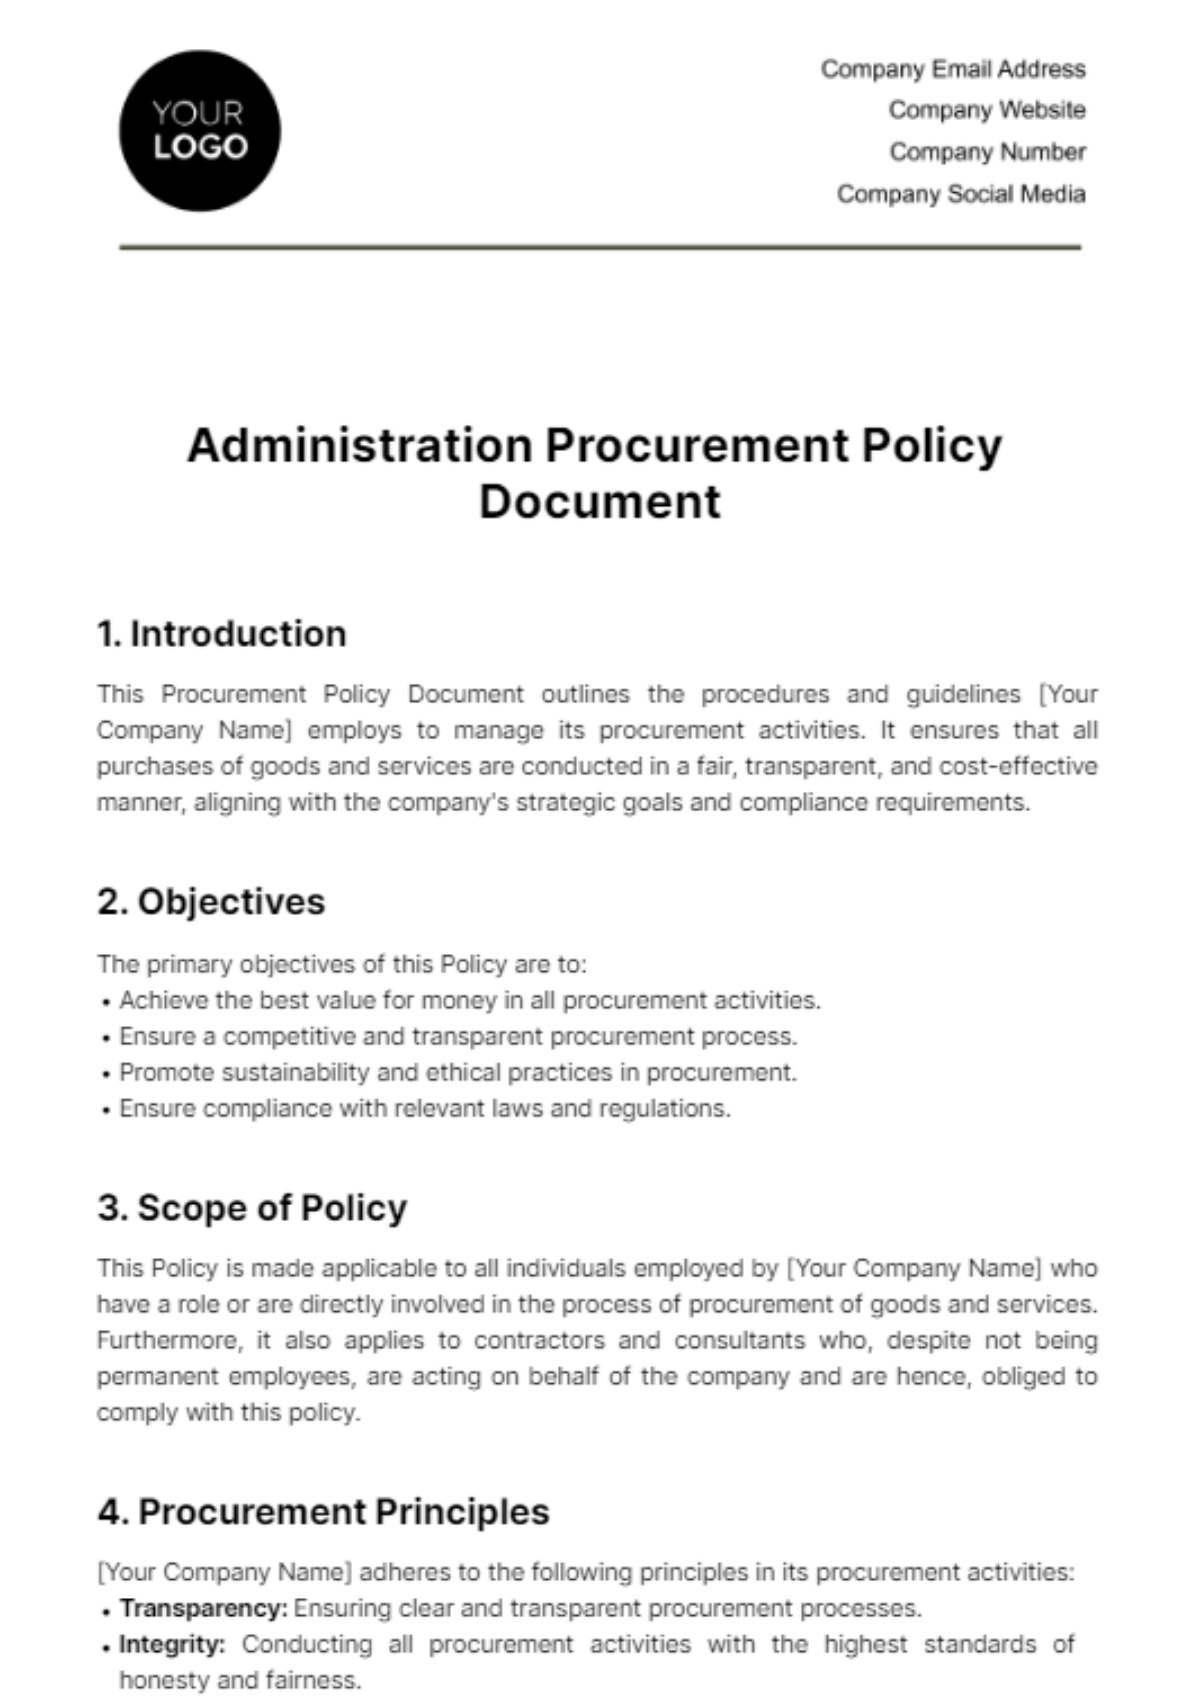 Administration Procurement Policy Document Template